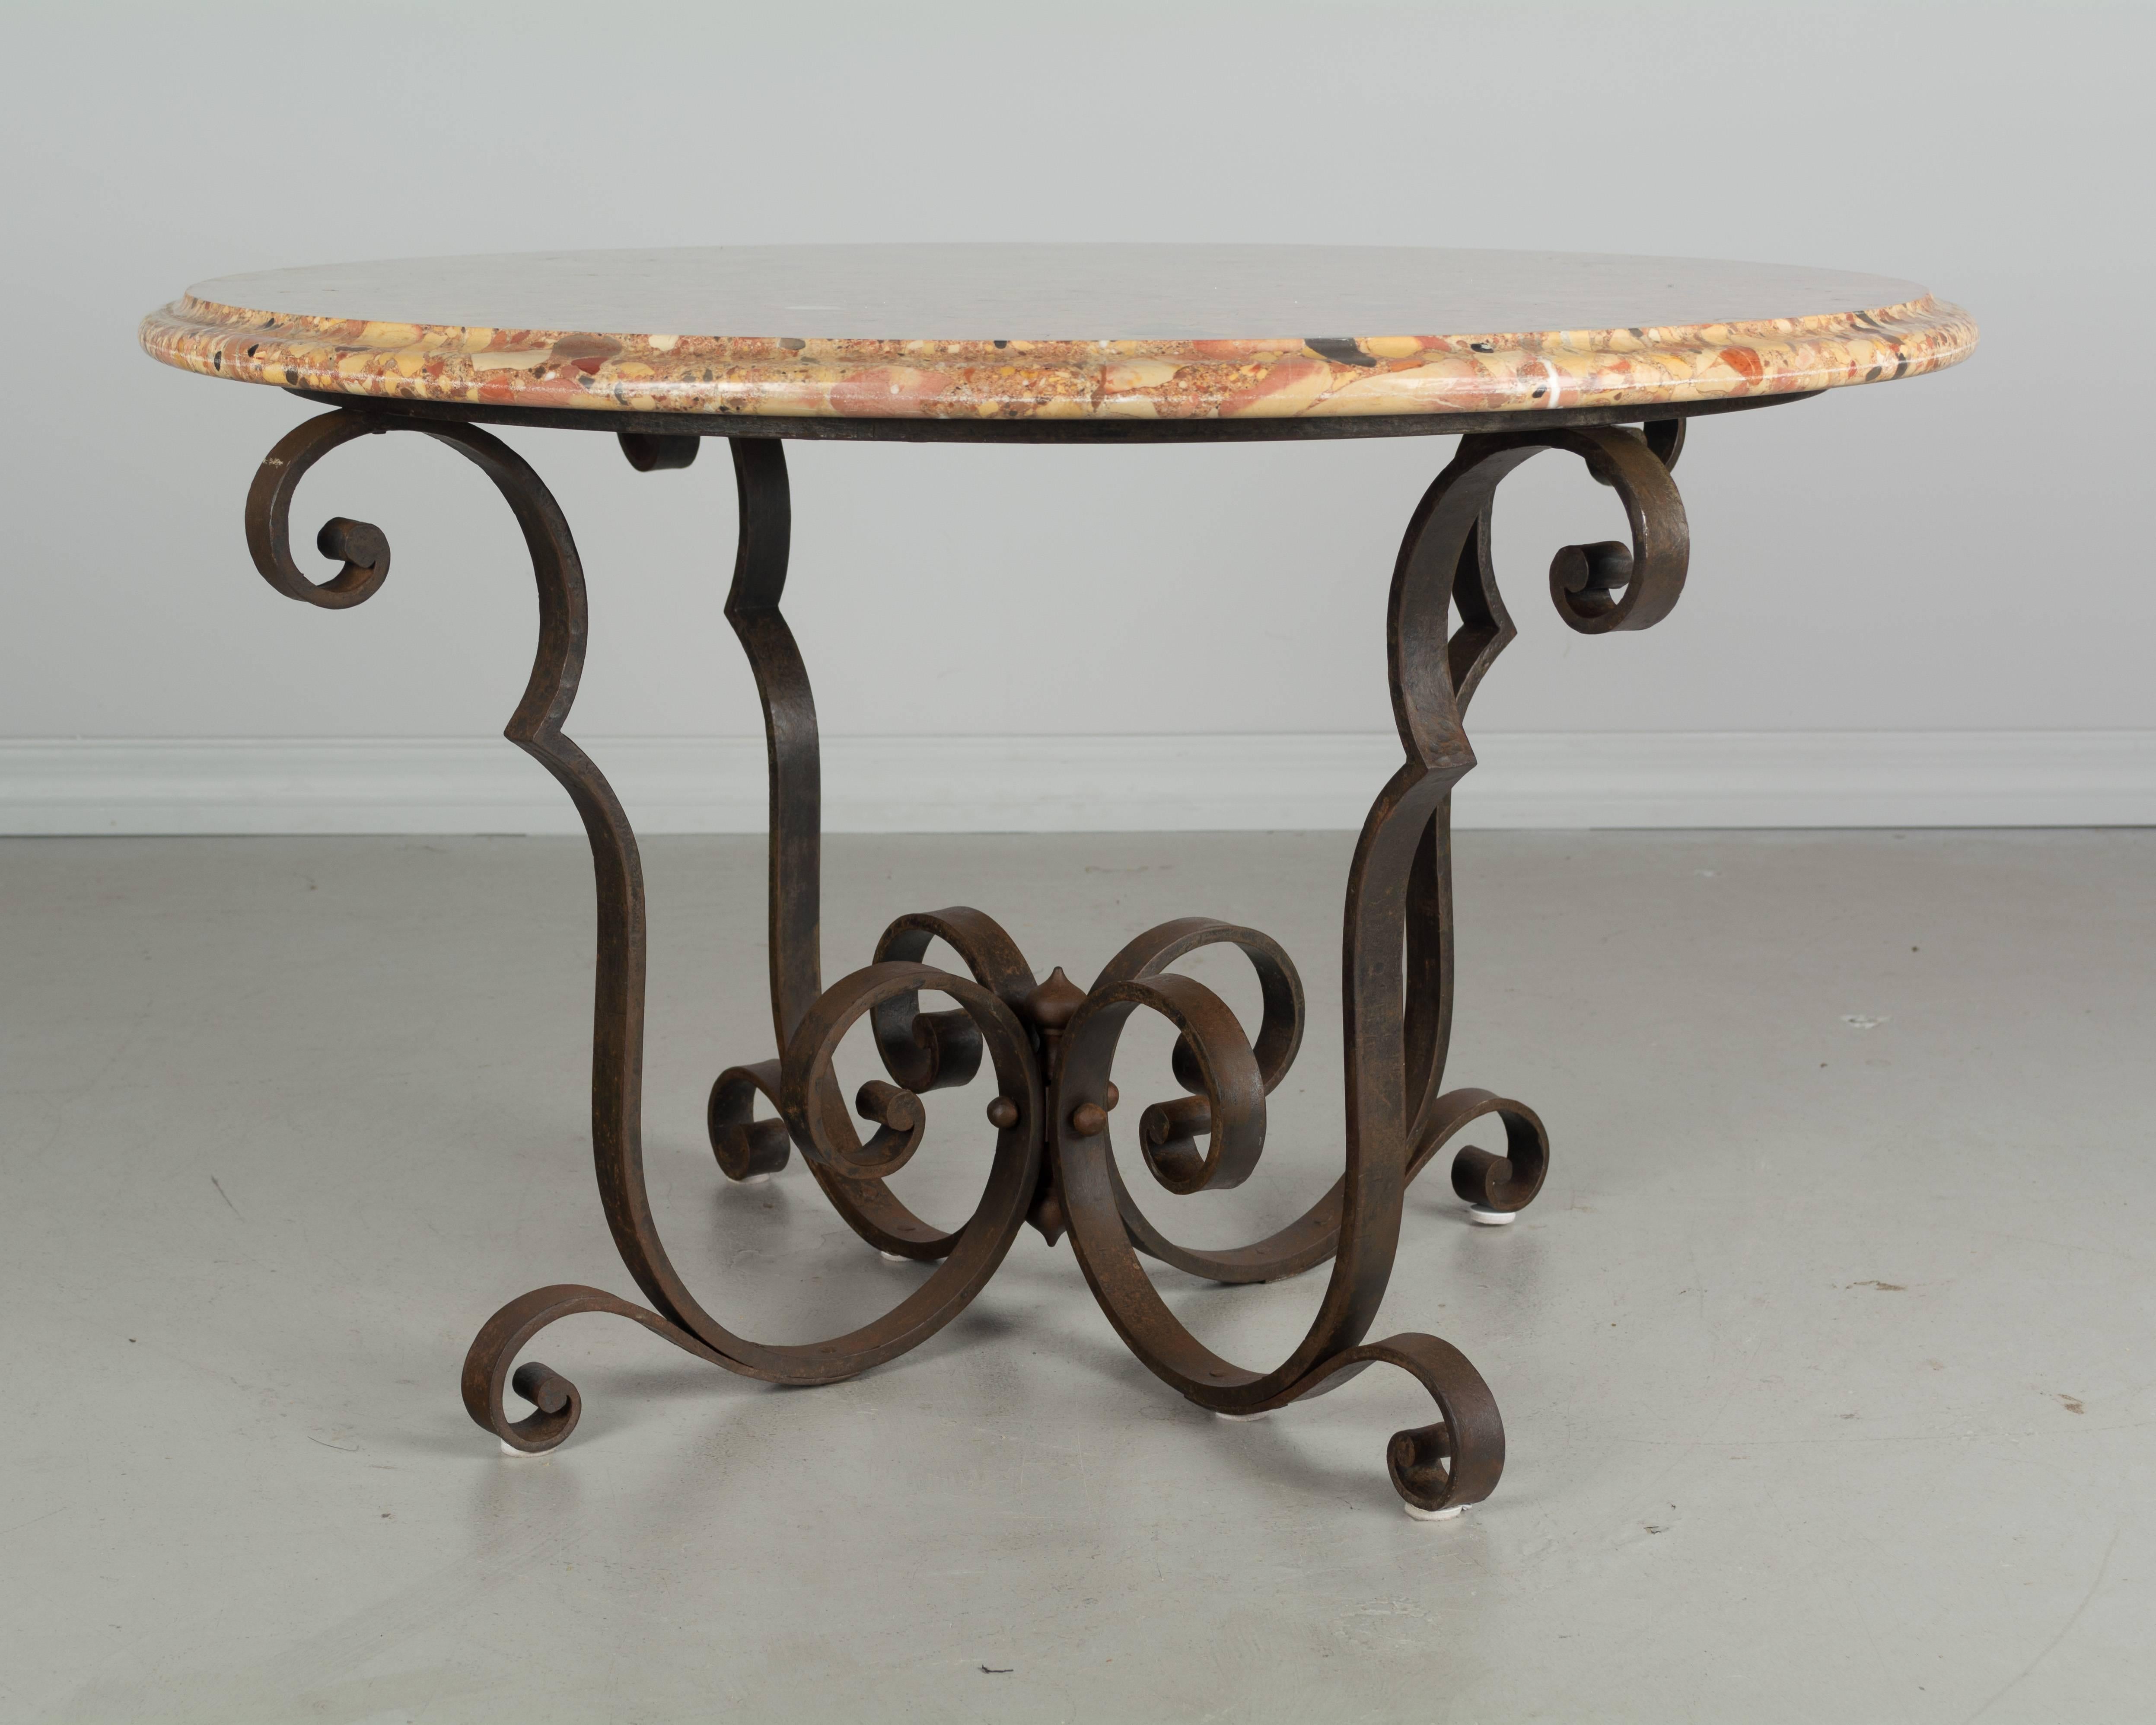 French Art Deco Wrought Iron Marble-Top Table In Good Condition For Sale In Winter Park, FL